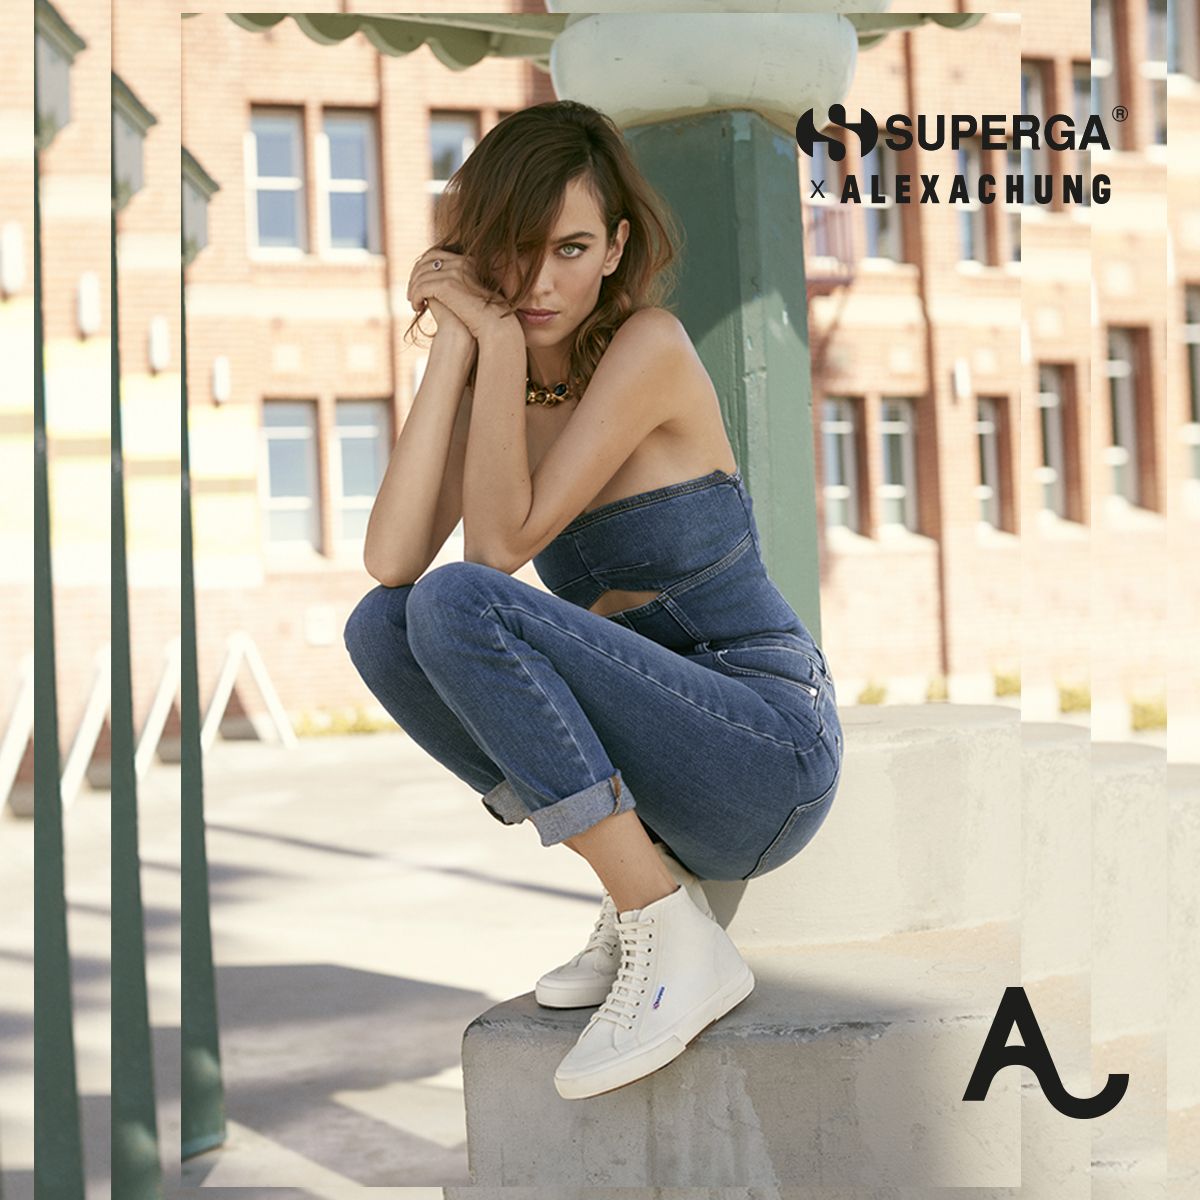 Alexa Chung Superga Sneakers Outfit | Who What Wear